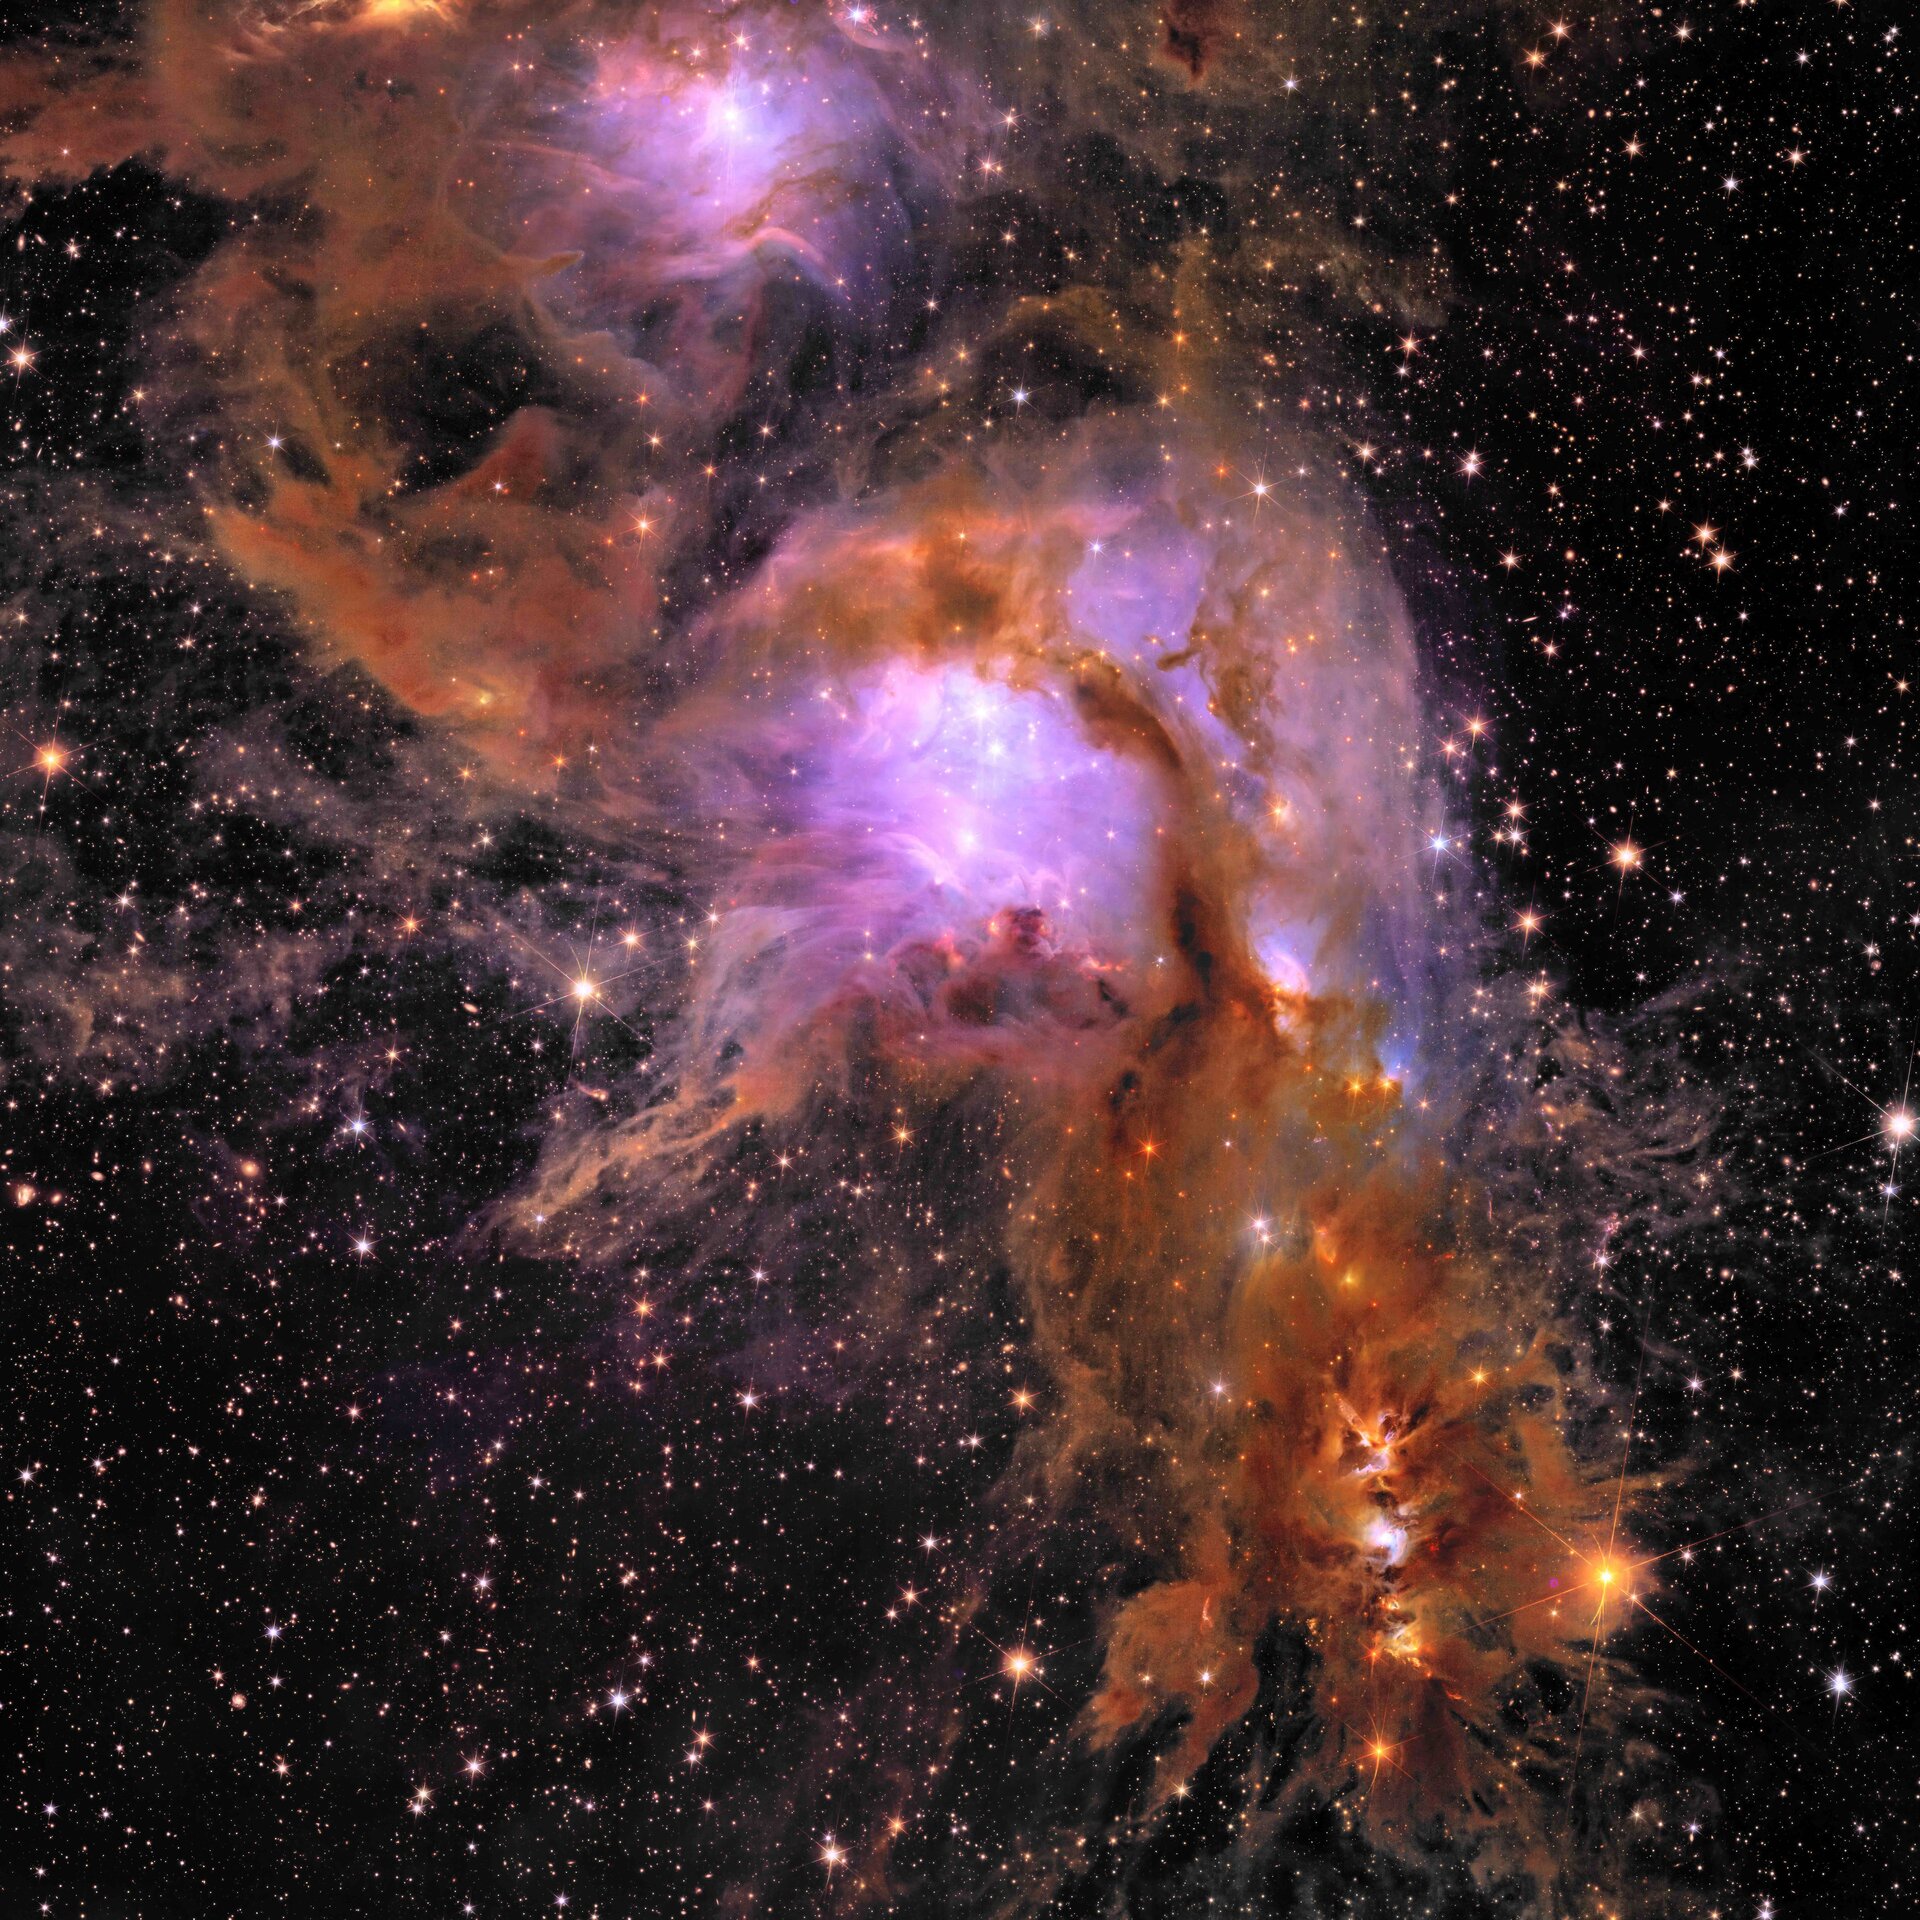 A filamentary orange veil covers a bright region of star formation. The background is dark, stippled with stars and galaxies ranging from small bright dots to starry shapes. The foreground veil spans from upper left to the bottom right and resembles a seahorse. Bright stars light up the ‘eye’ and ‘chest’ regions of the seahorse with purple light. Within the tail, three bright spots sit in a traffic-light like formation.